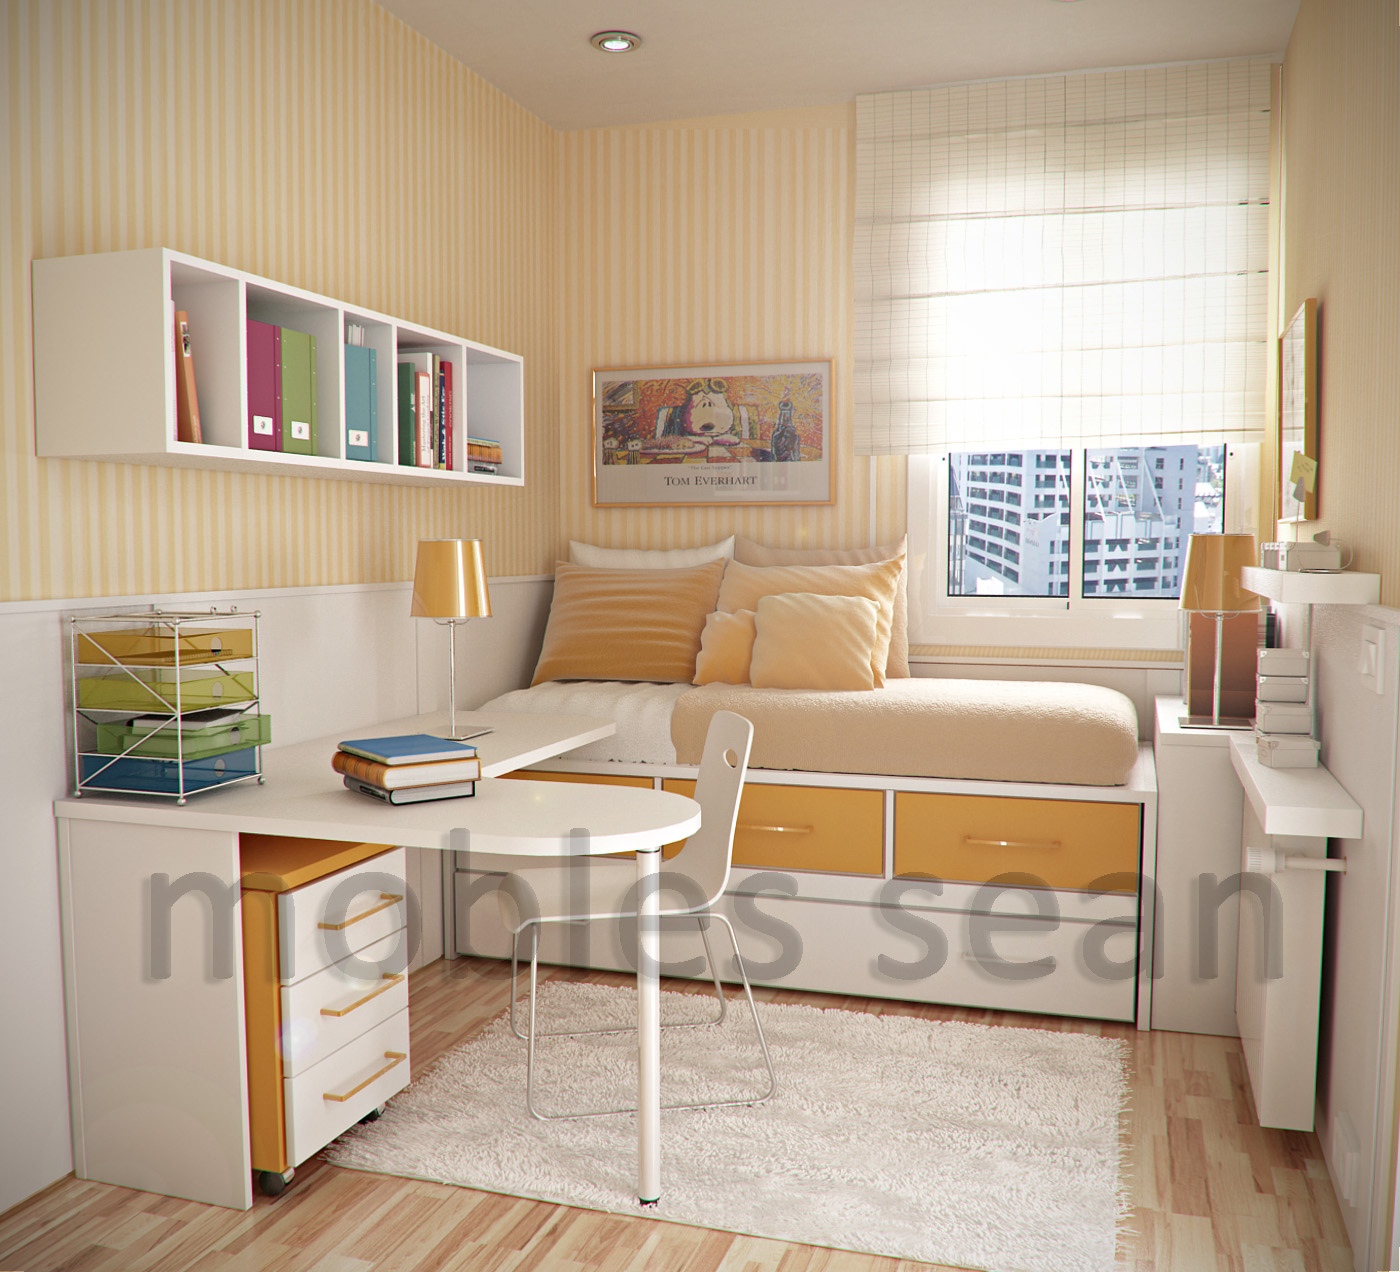 Space Saving Designs For Small Kids Rooms